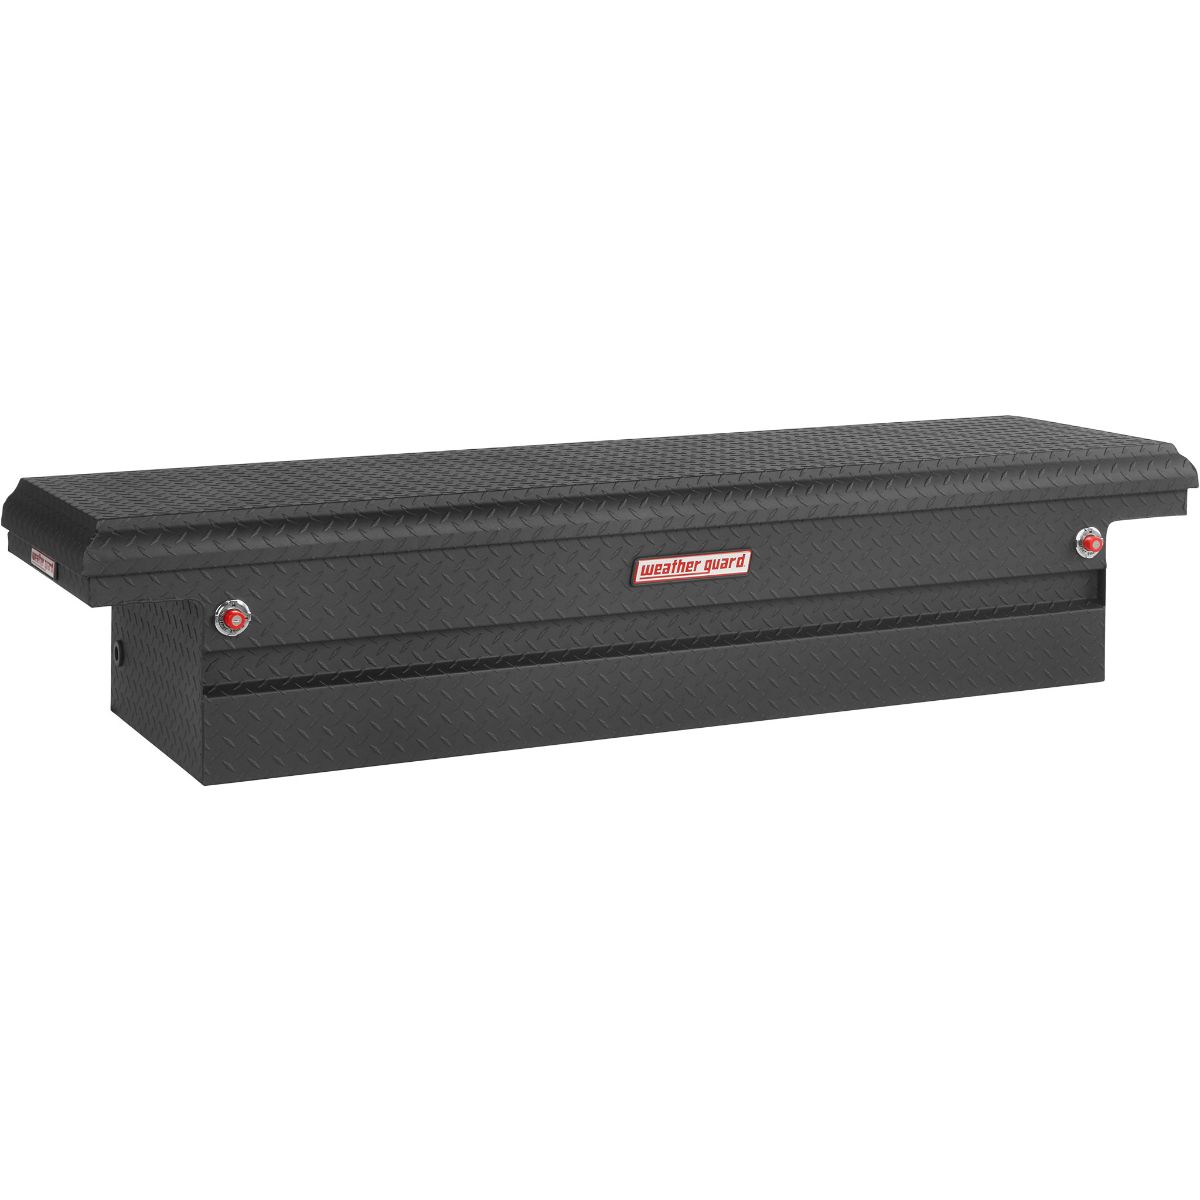 The Best Truck Tool Boxes - A Complete Buyers Guide